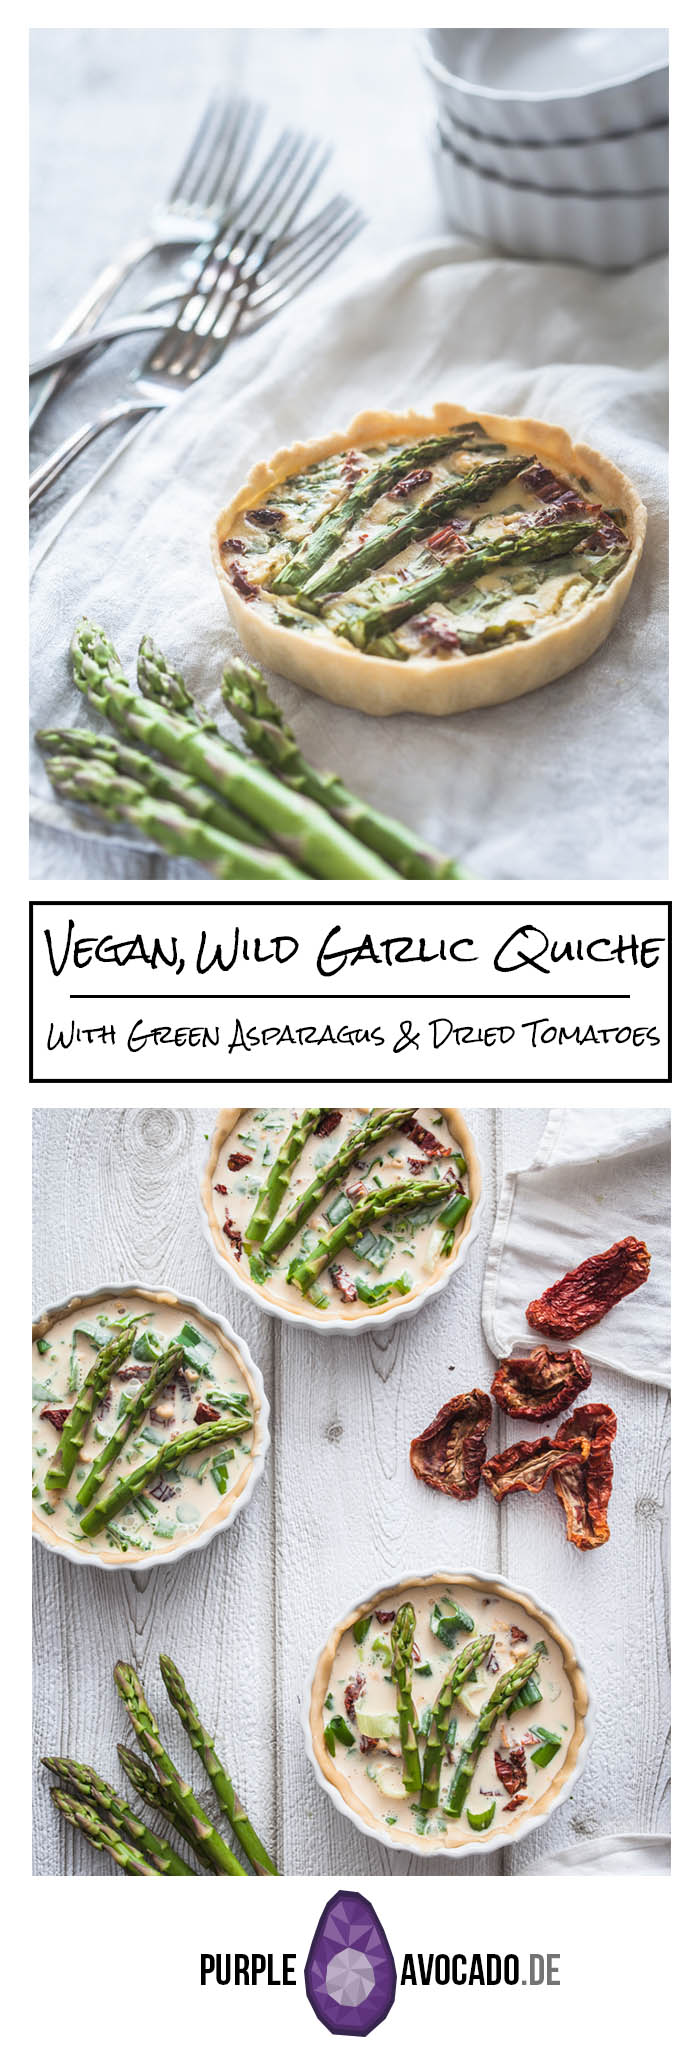 Vegan, healthy and damn photogenic - this vegan quiche with green asparagus, buckrams, escallions and dried tomatoes combines it all. It is easy and fast to prepare and will impress even your most critical guests. More on Purple Avocado.